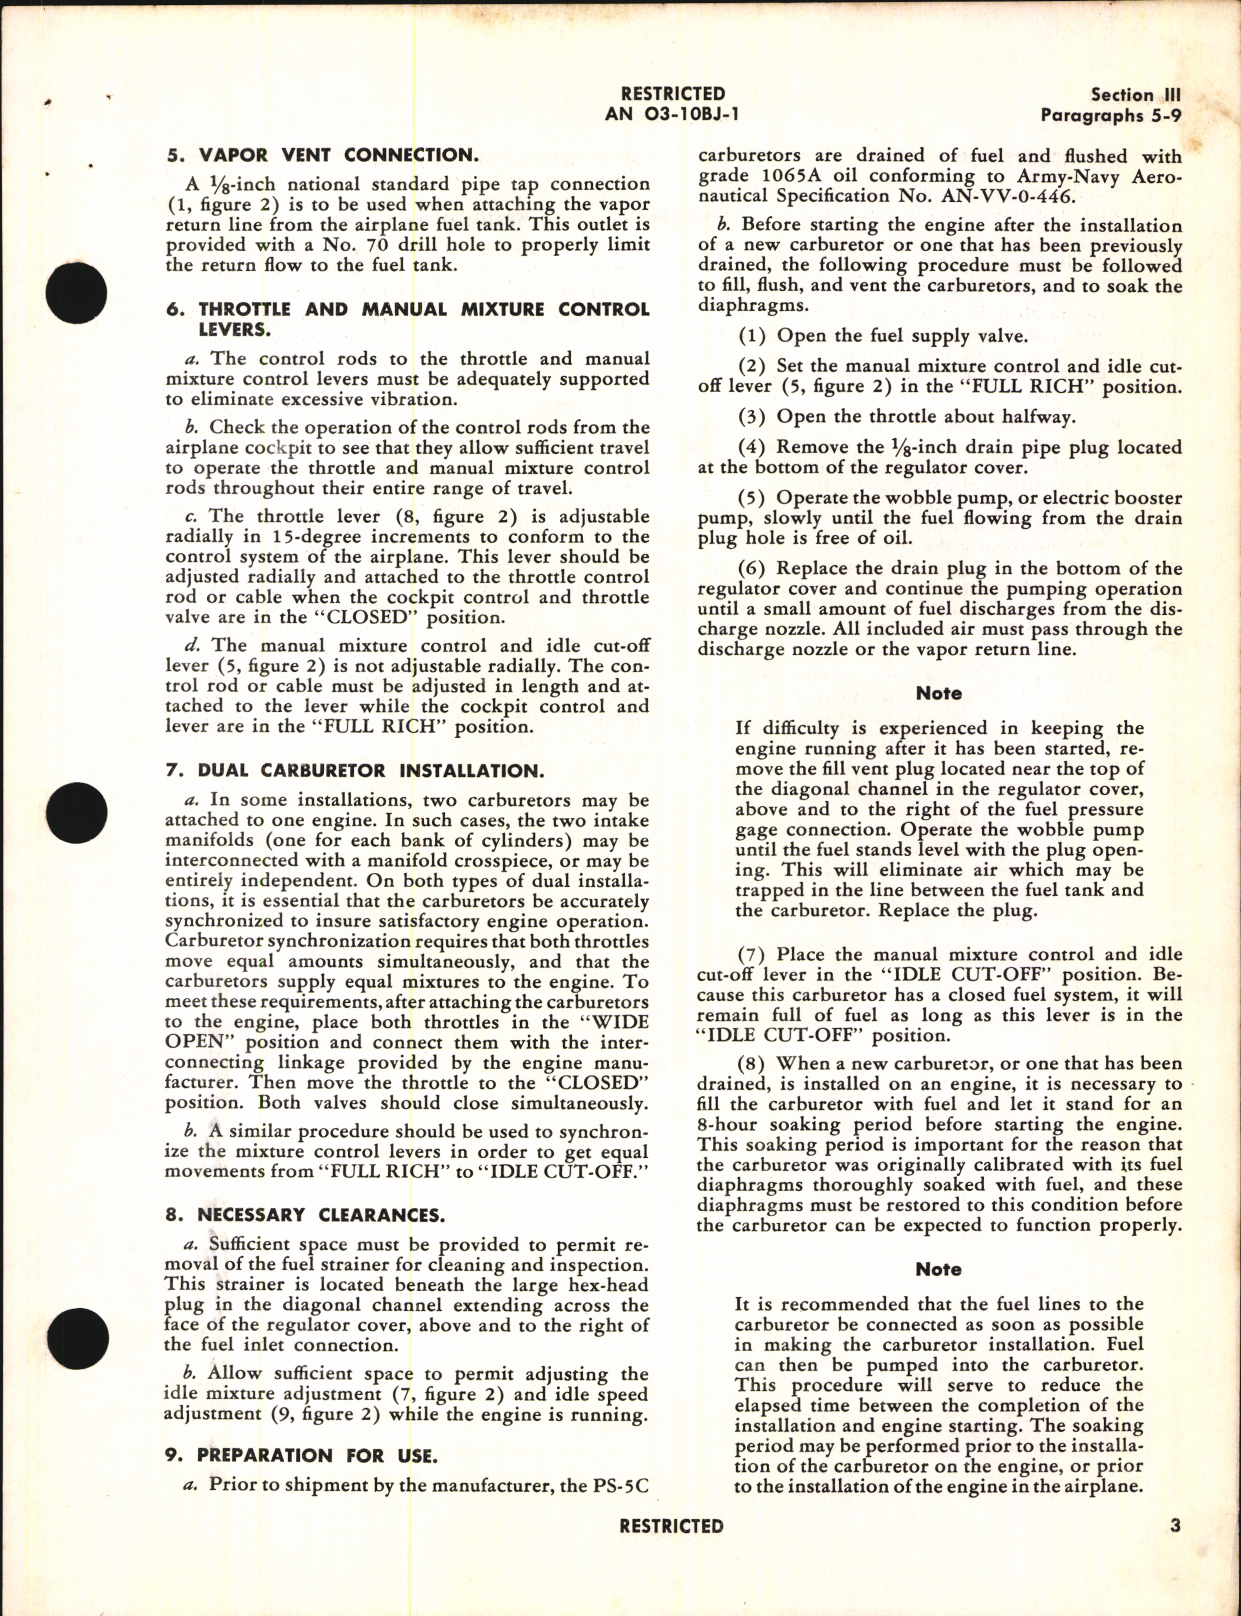 Sample page 5 from AirCorps Library document: Handbook of Instructions with Parts Catalog for Type PS-5C Injection Carburetor